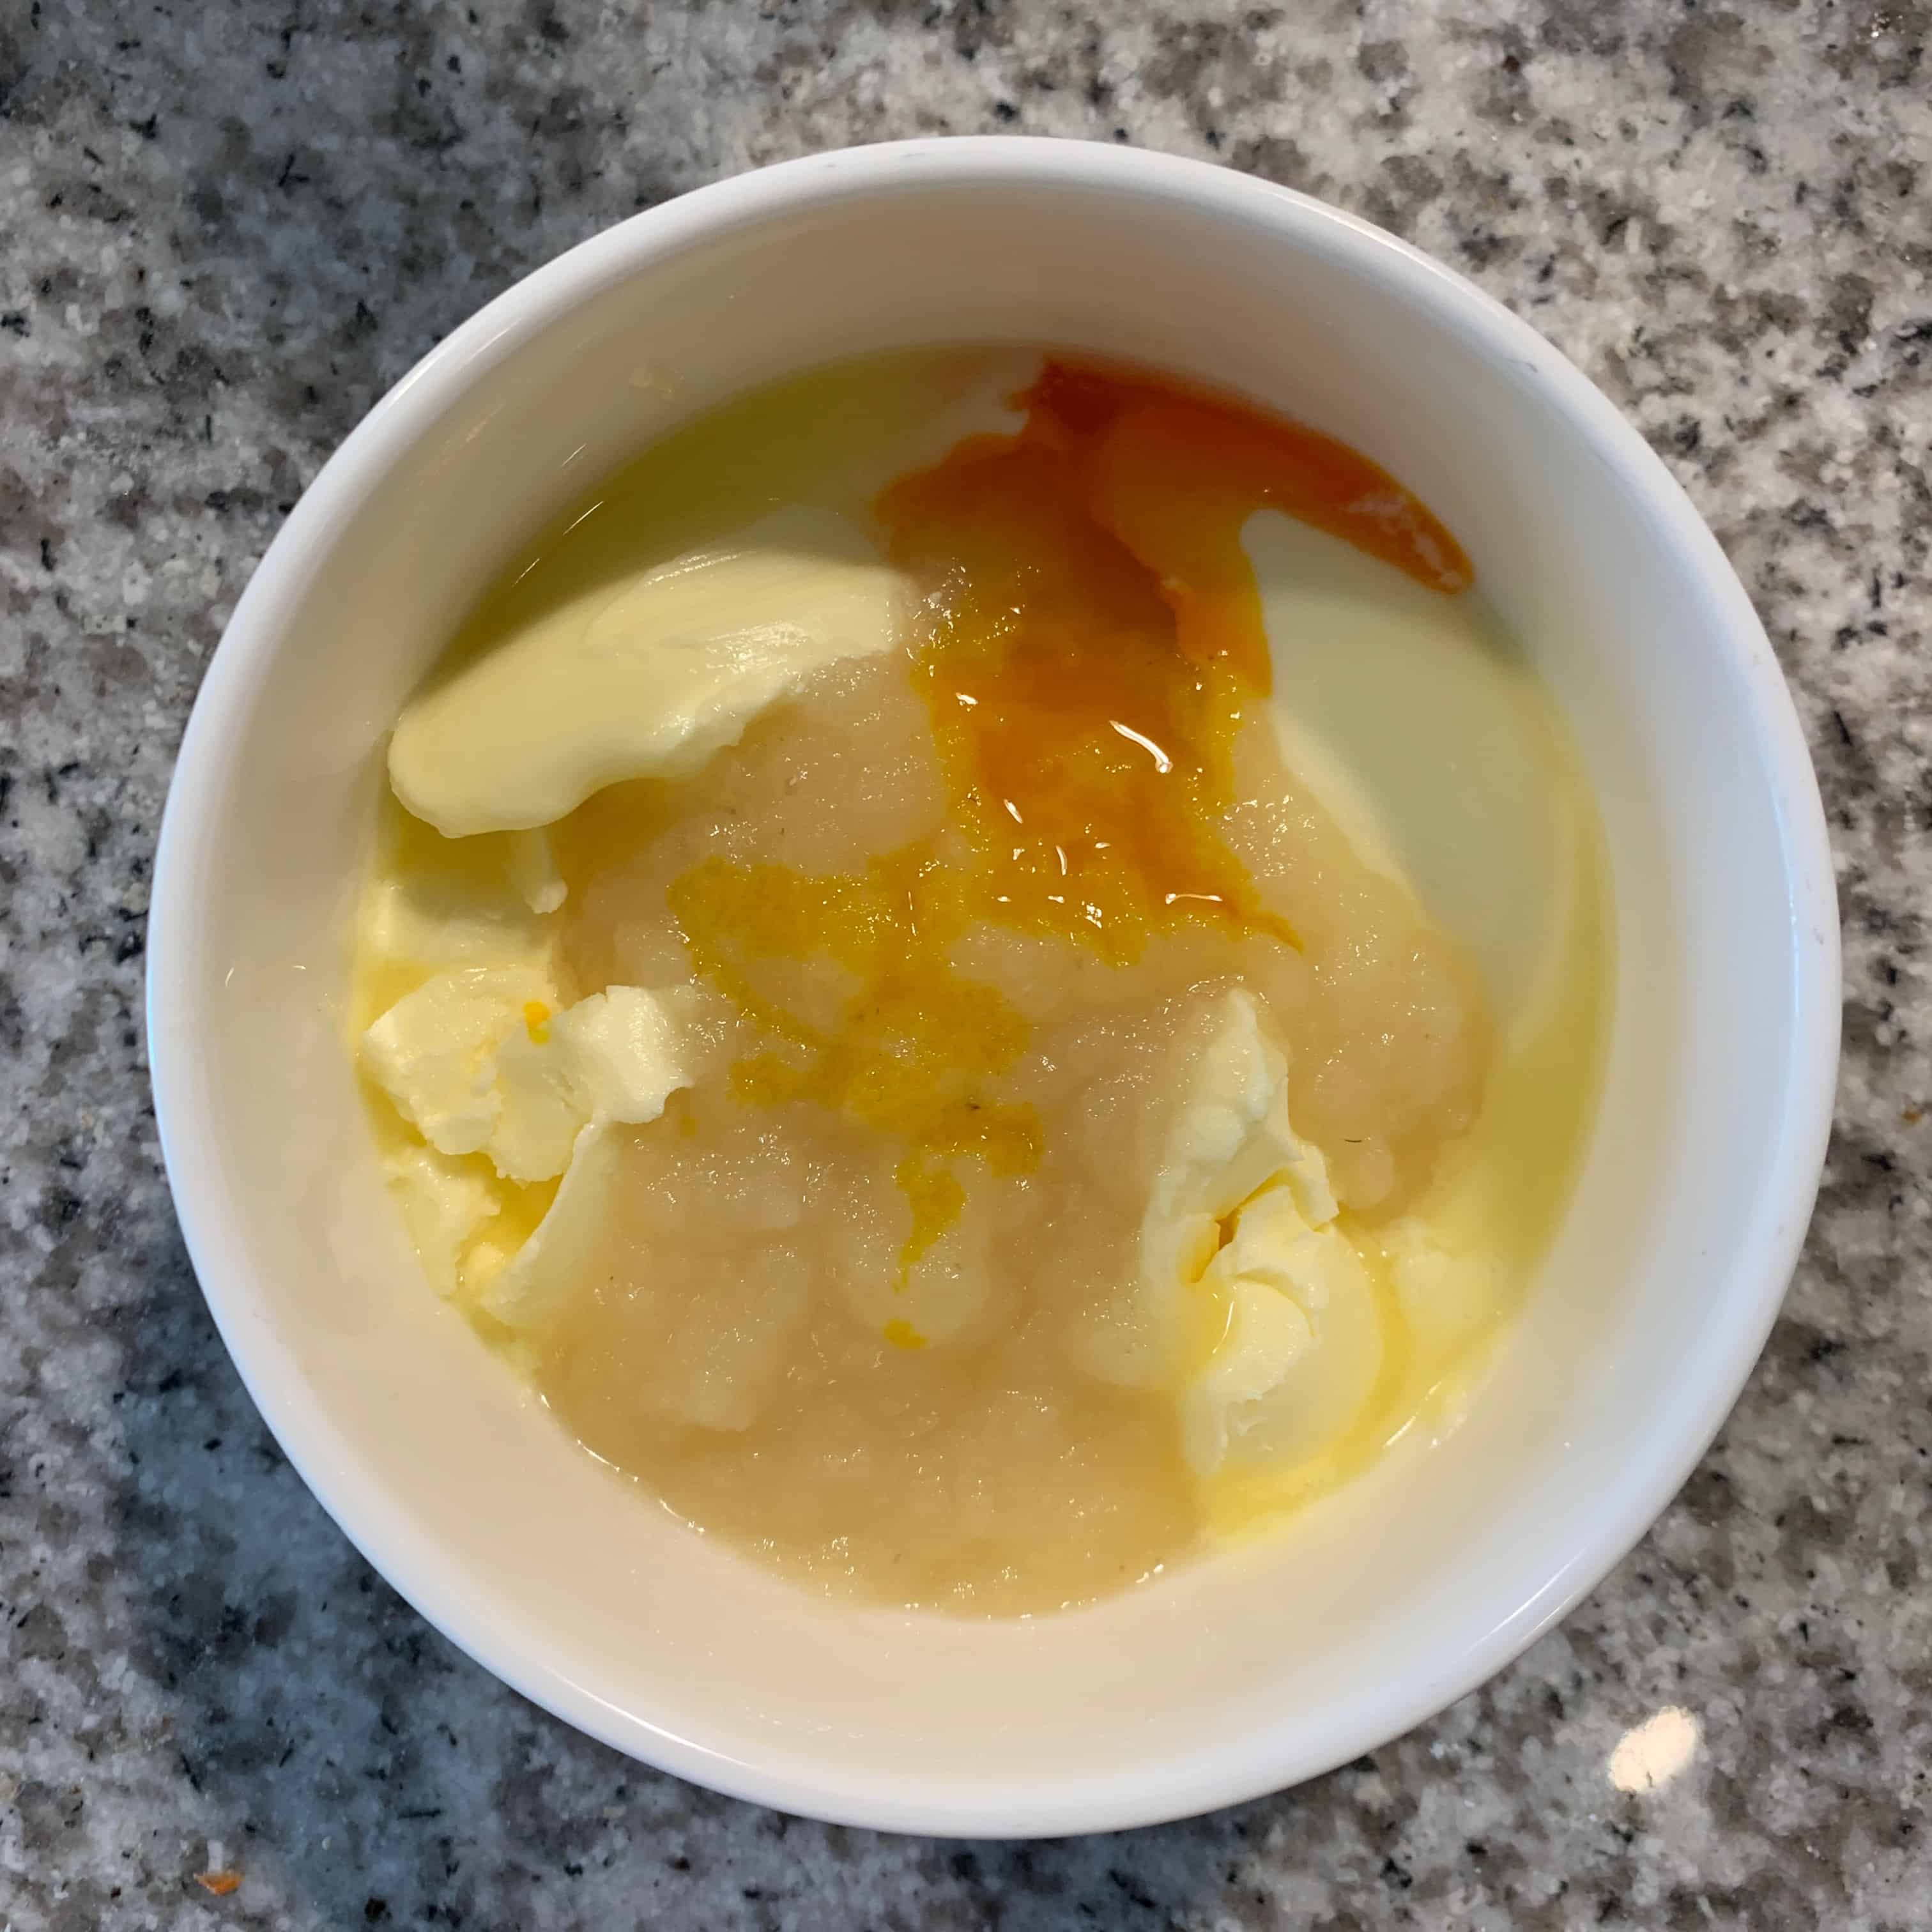 butter, apple sauce, and cake batter extract